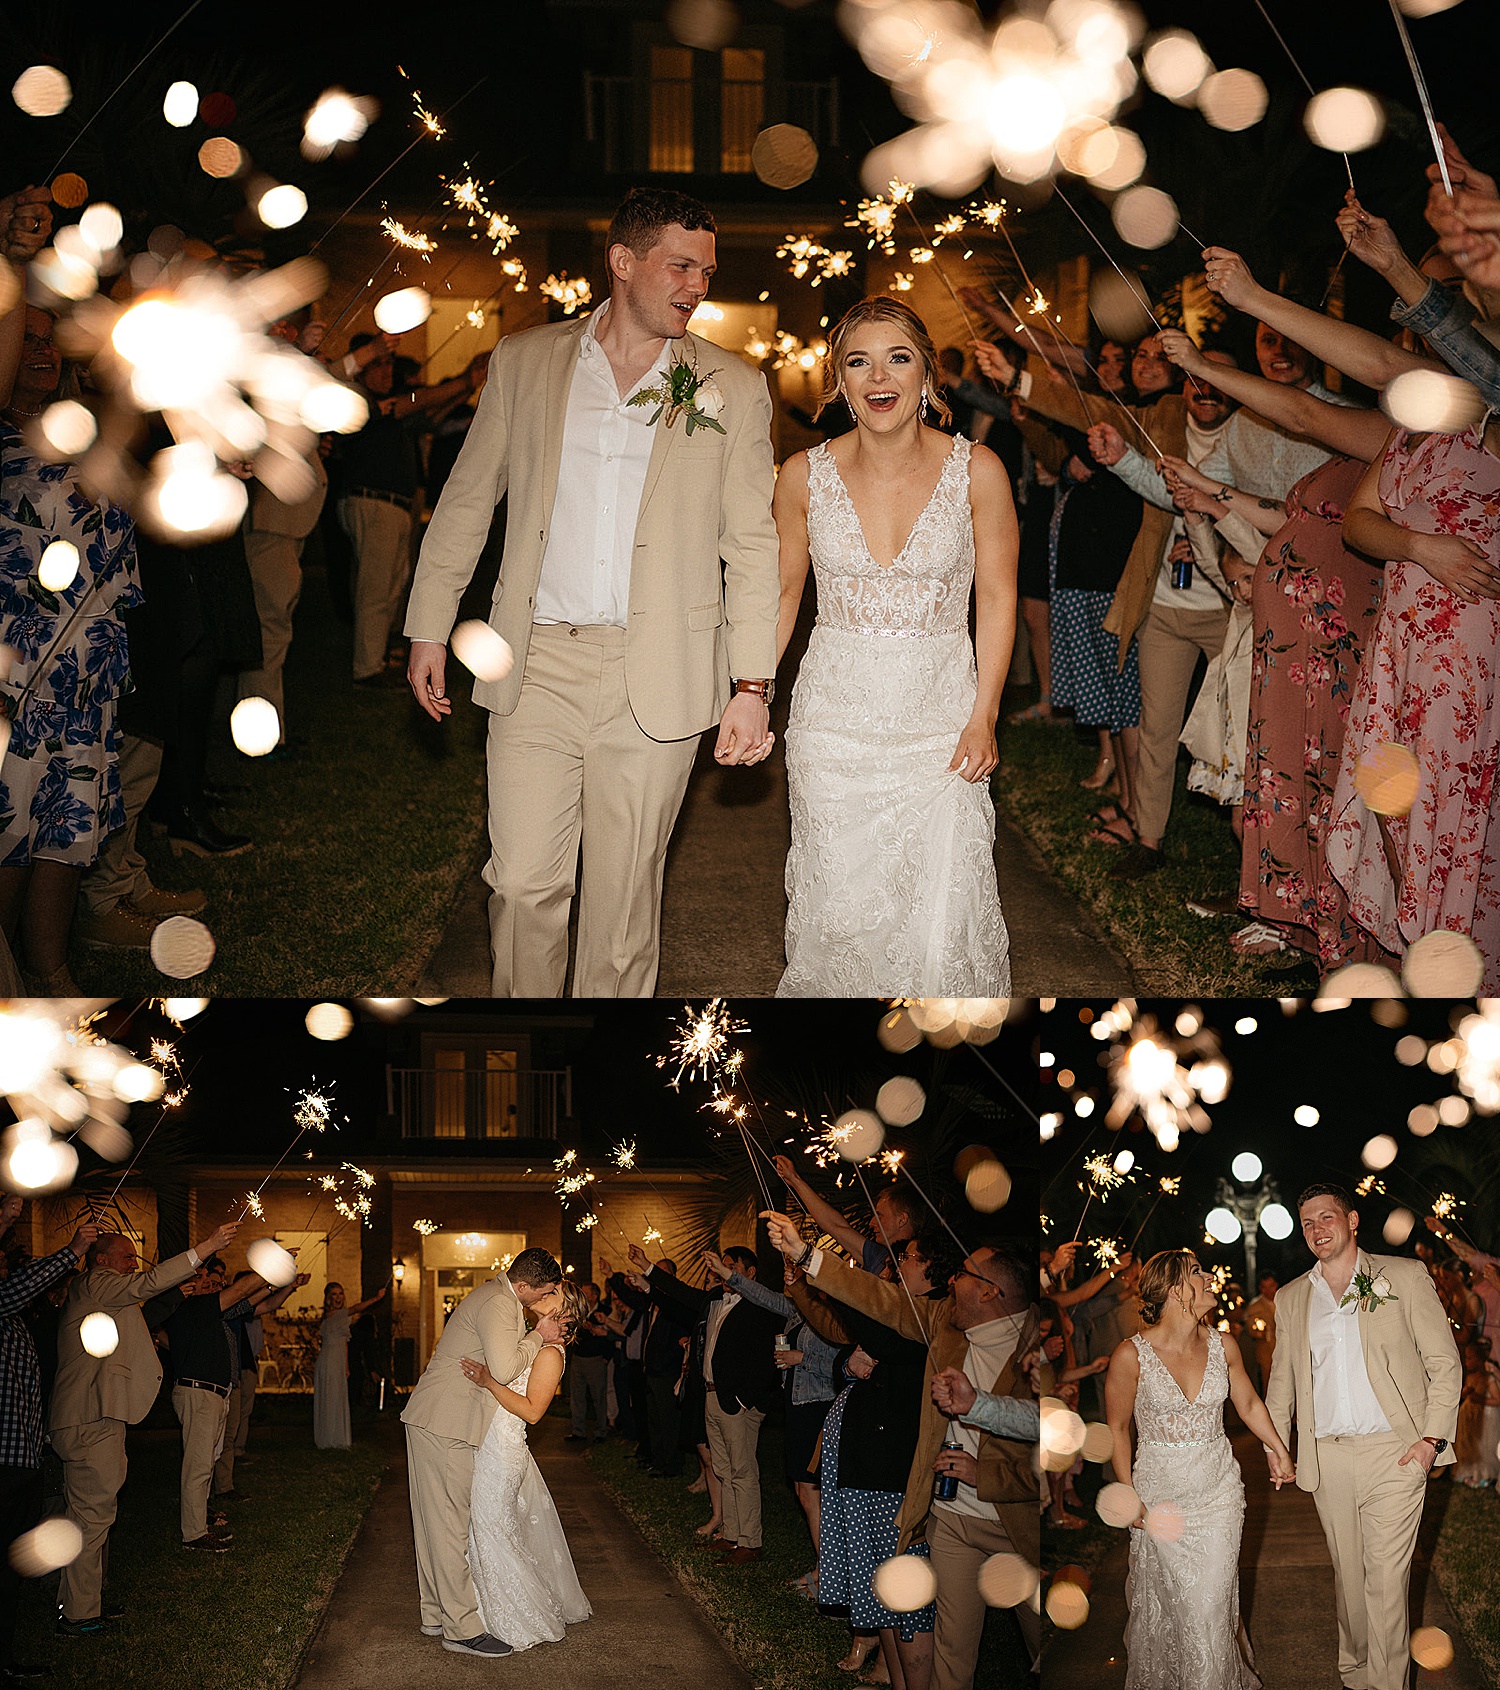 Newly married couple have sparkler exit at Lauren Hill Farm at the end of wedding day